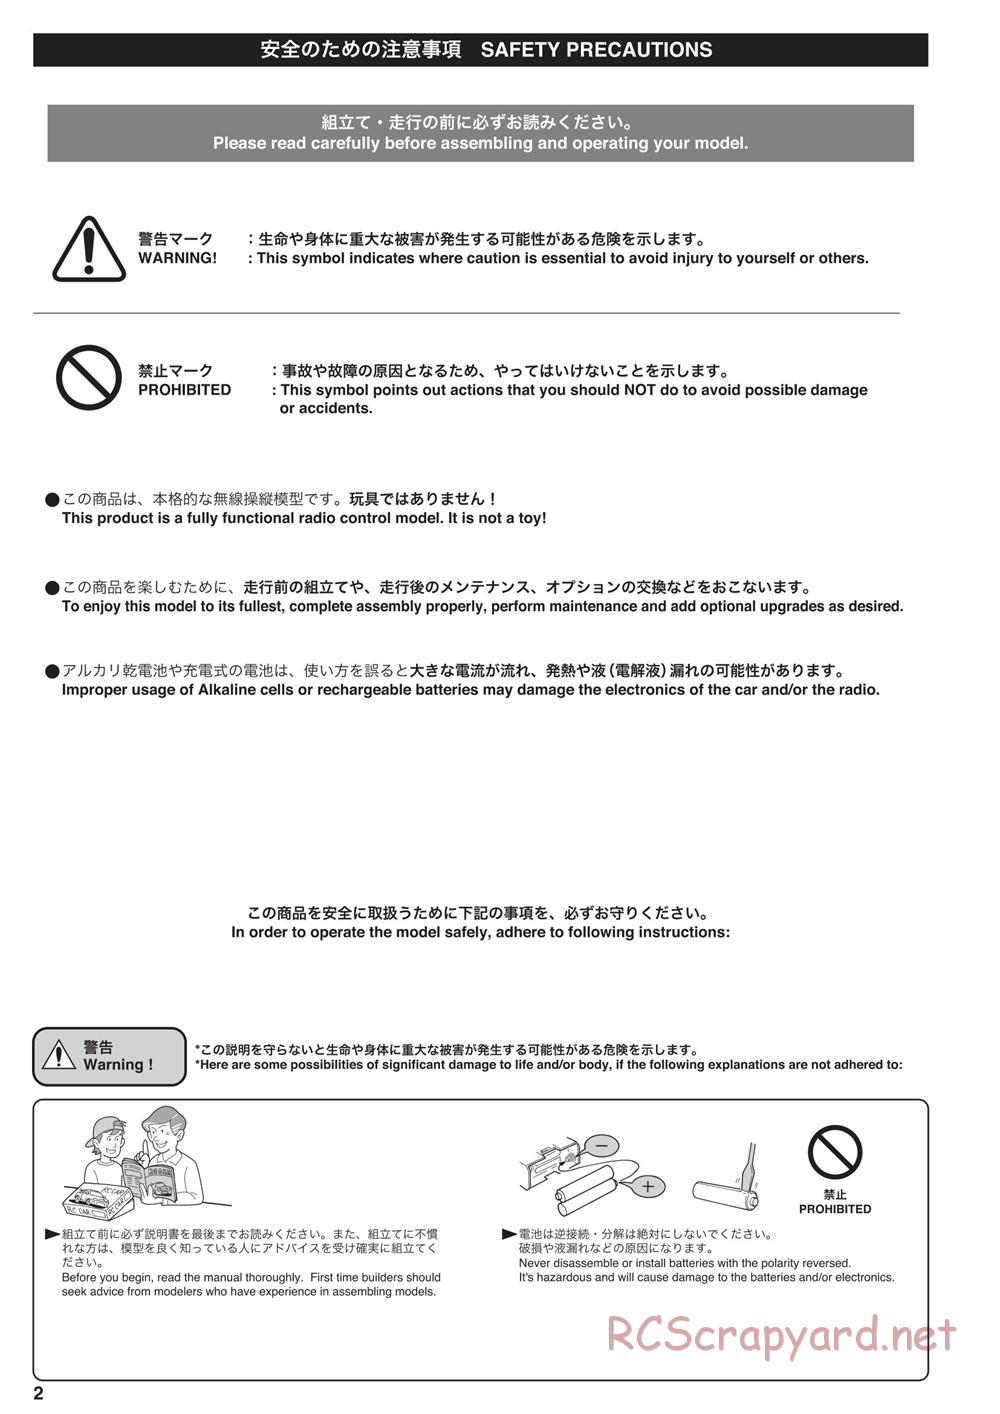 Kyosho - Inferno MP10 - Manual - Page 2